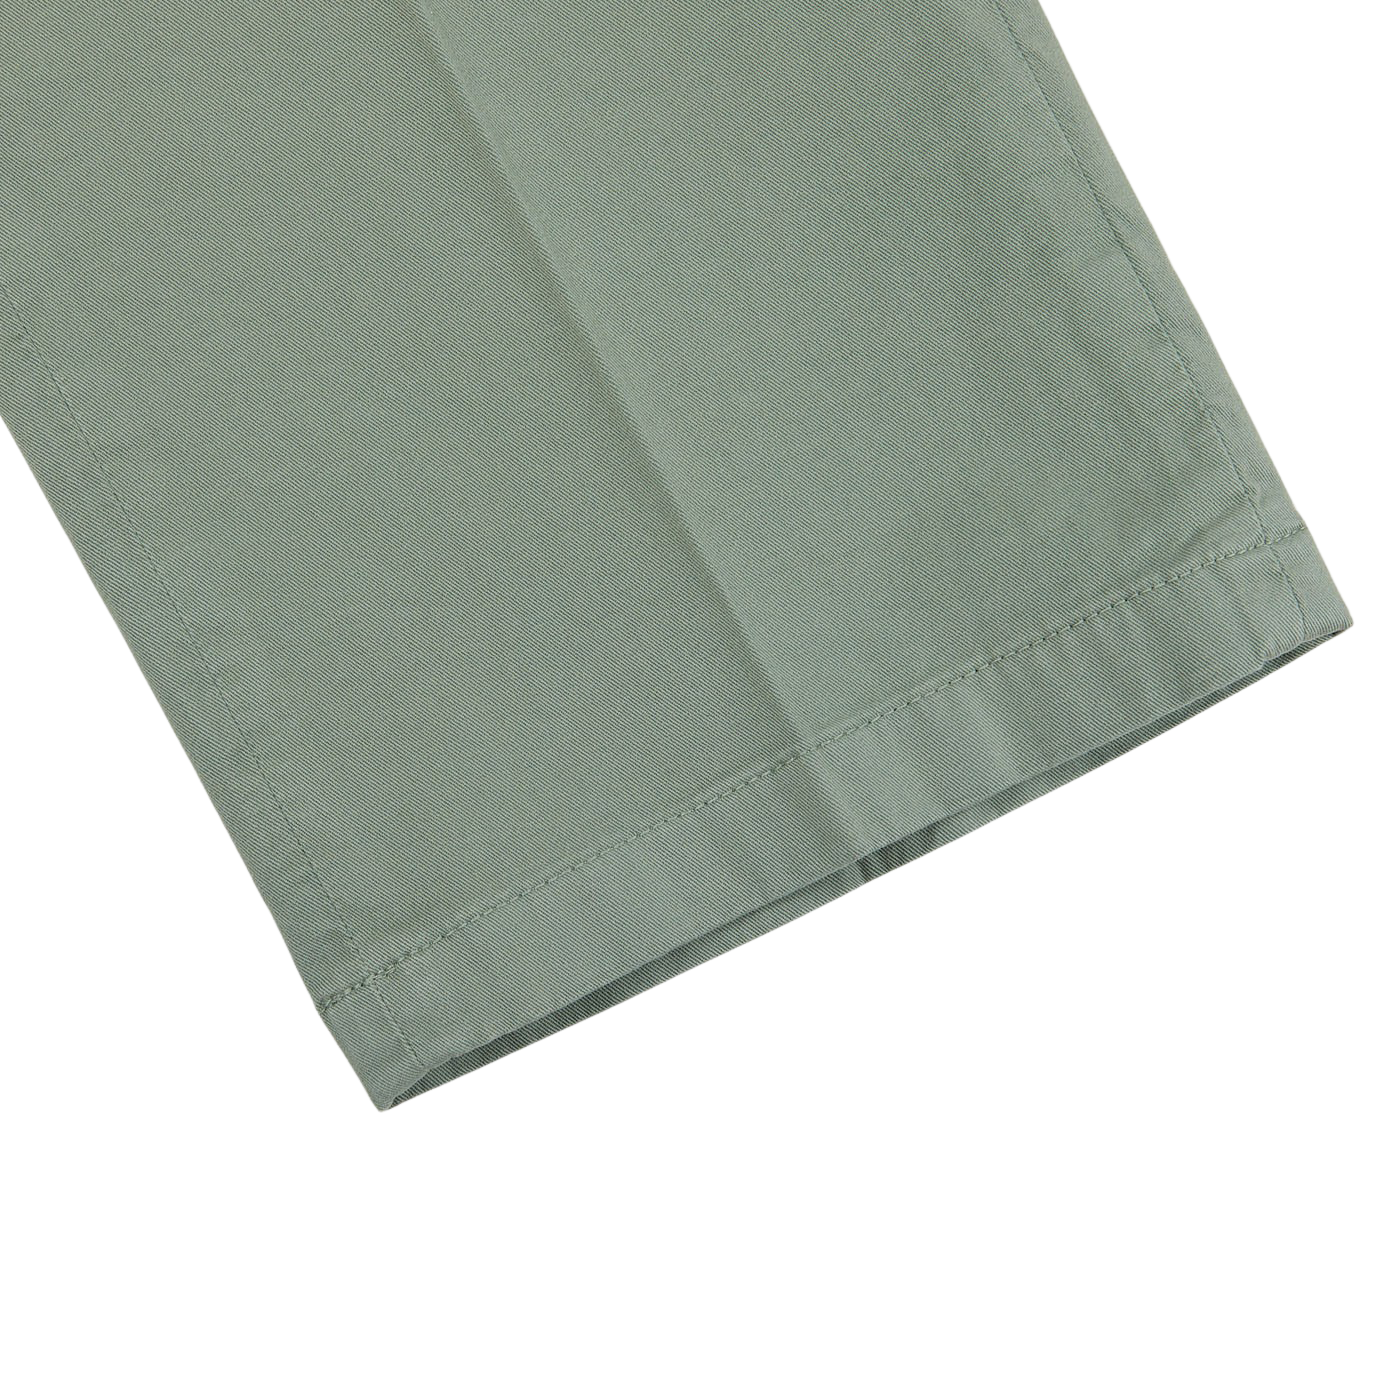 A close up of a pair of Canali Sage Green Cotton Stretch Flat Front Chinos.